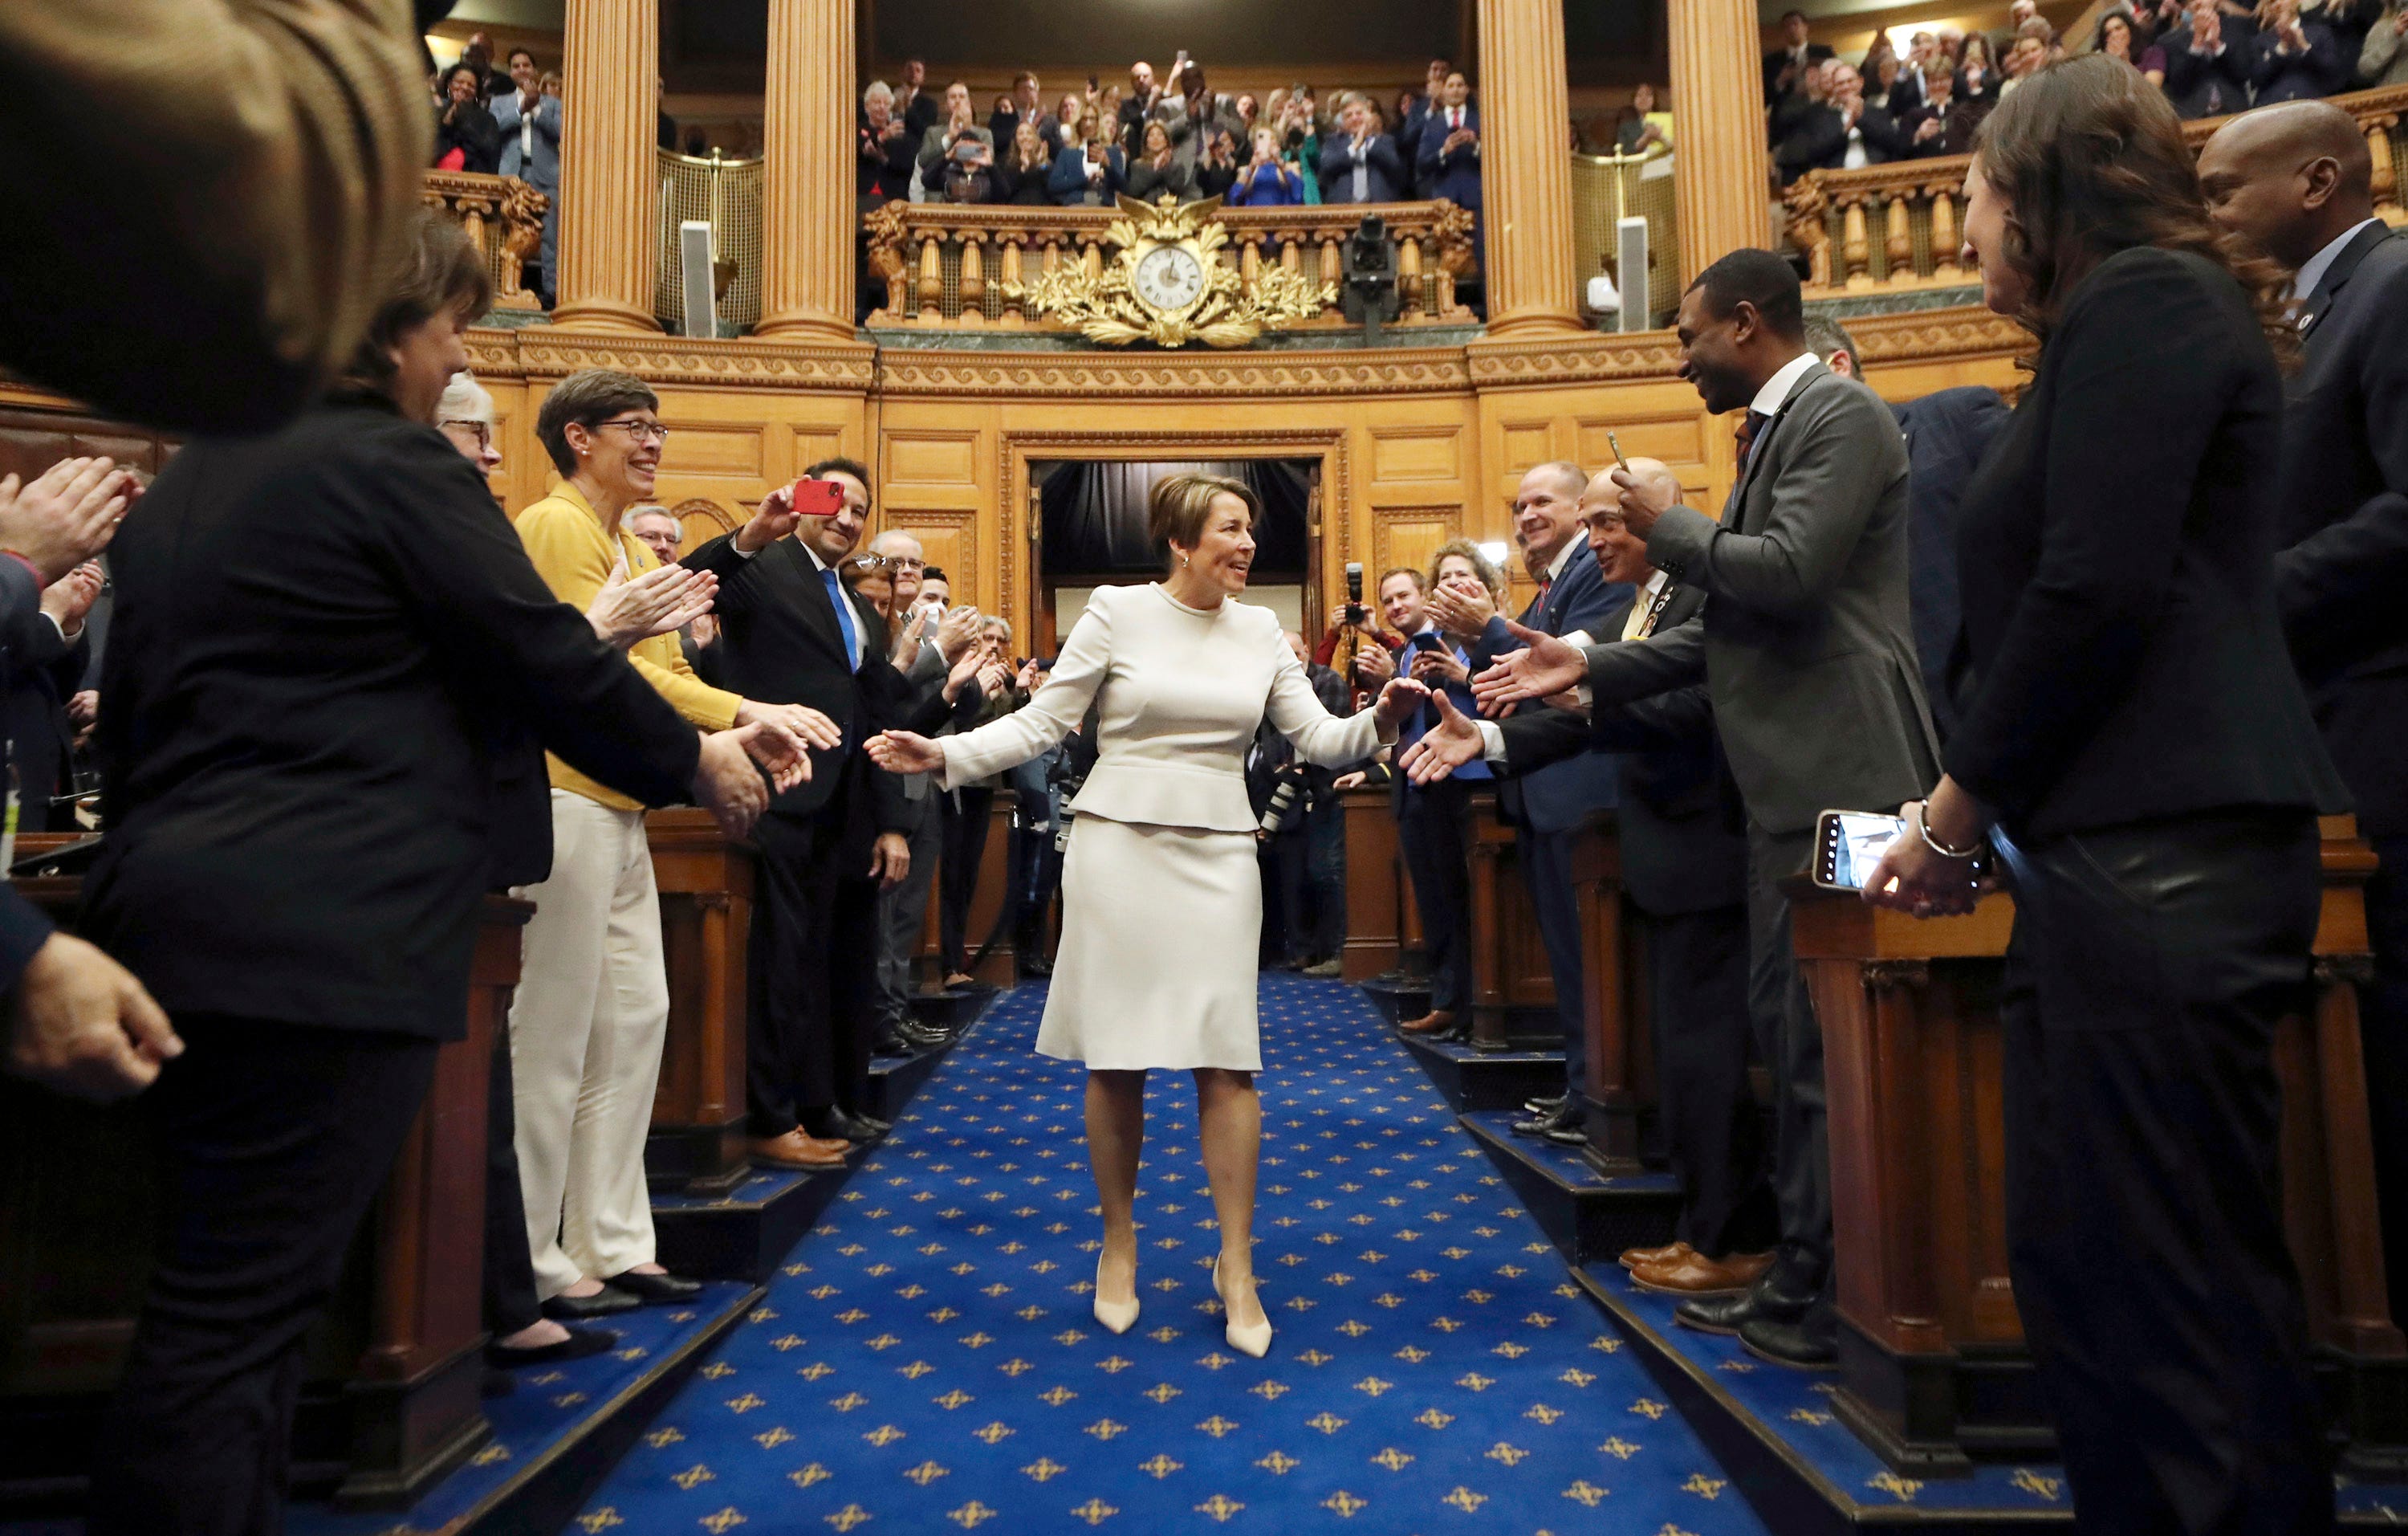 Mass. Gov.-elect Maura Healey shakes hands as she arrives in the House chambers to be sworn in as governor, Jan. 5, 2023, at the Statehouse in Boston.